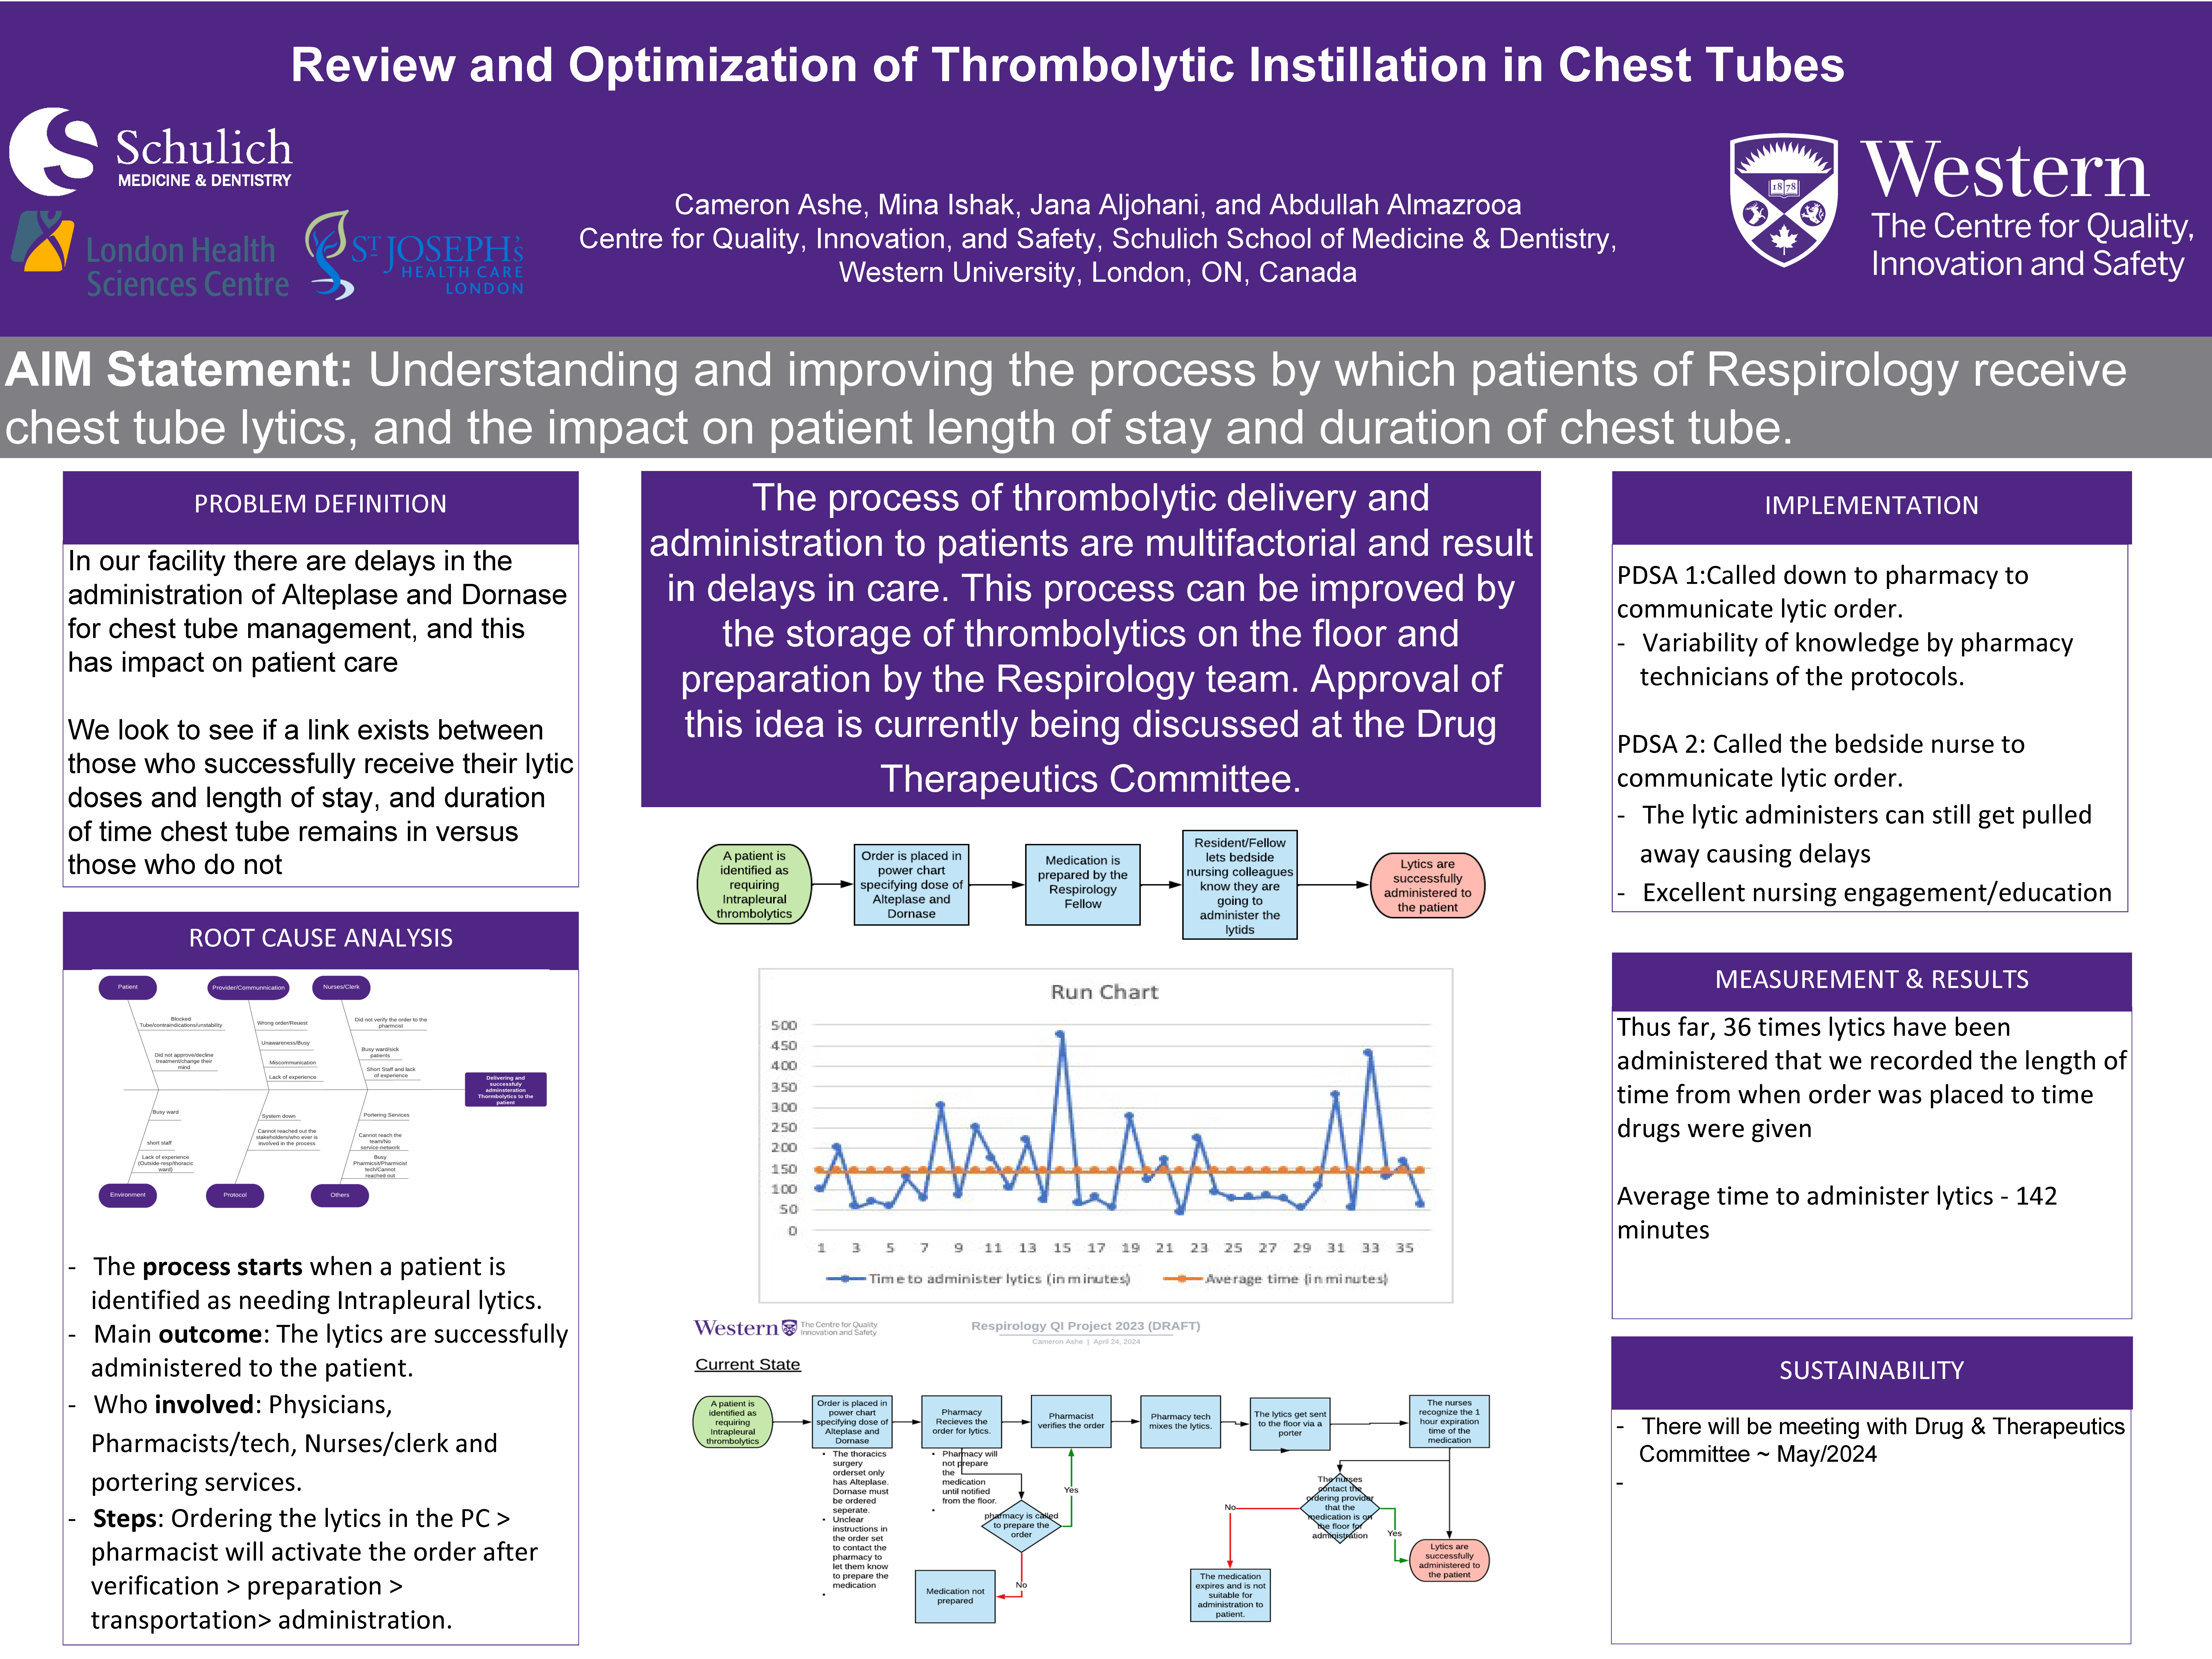 BISQ_2023-2024_Review and Optimization of Thrombolytic Instillation in Chest Tubes_Poster.png